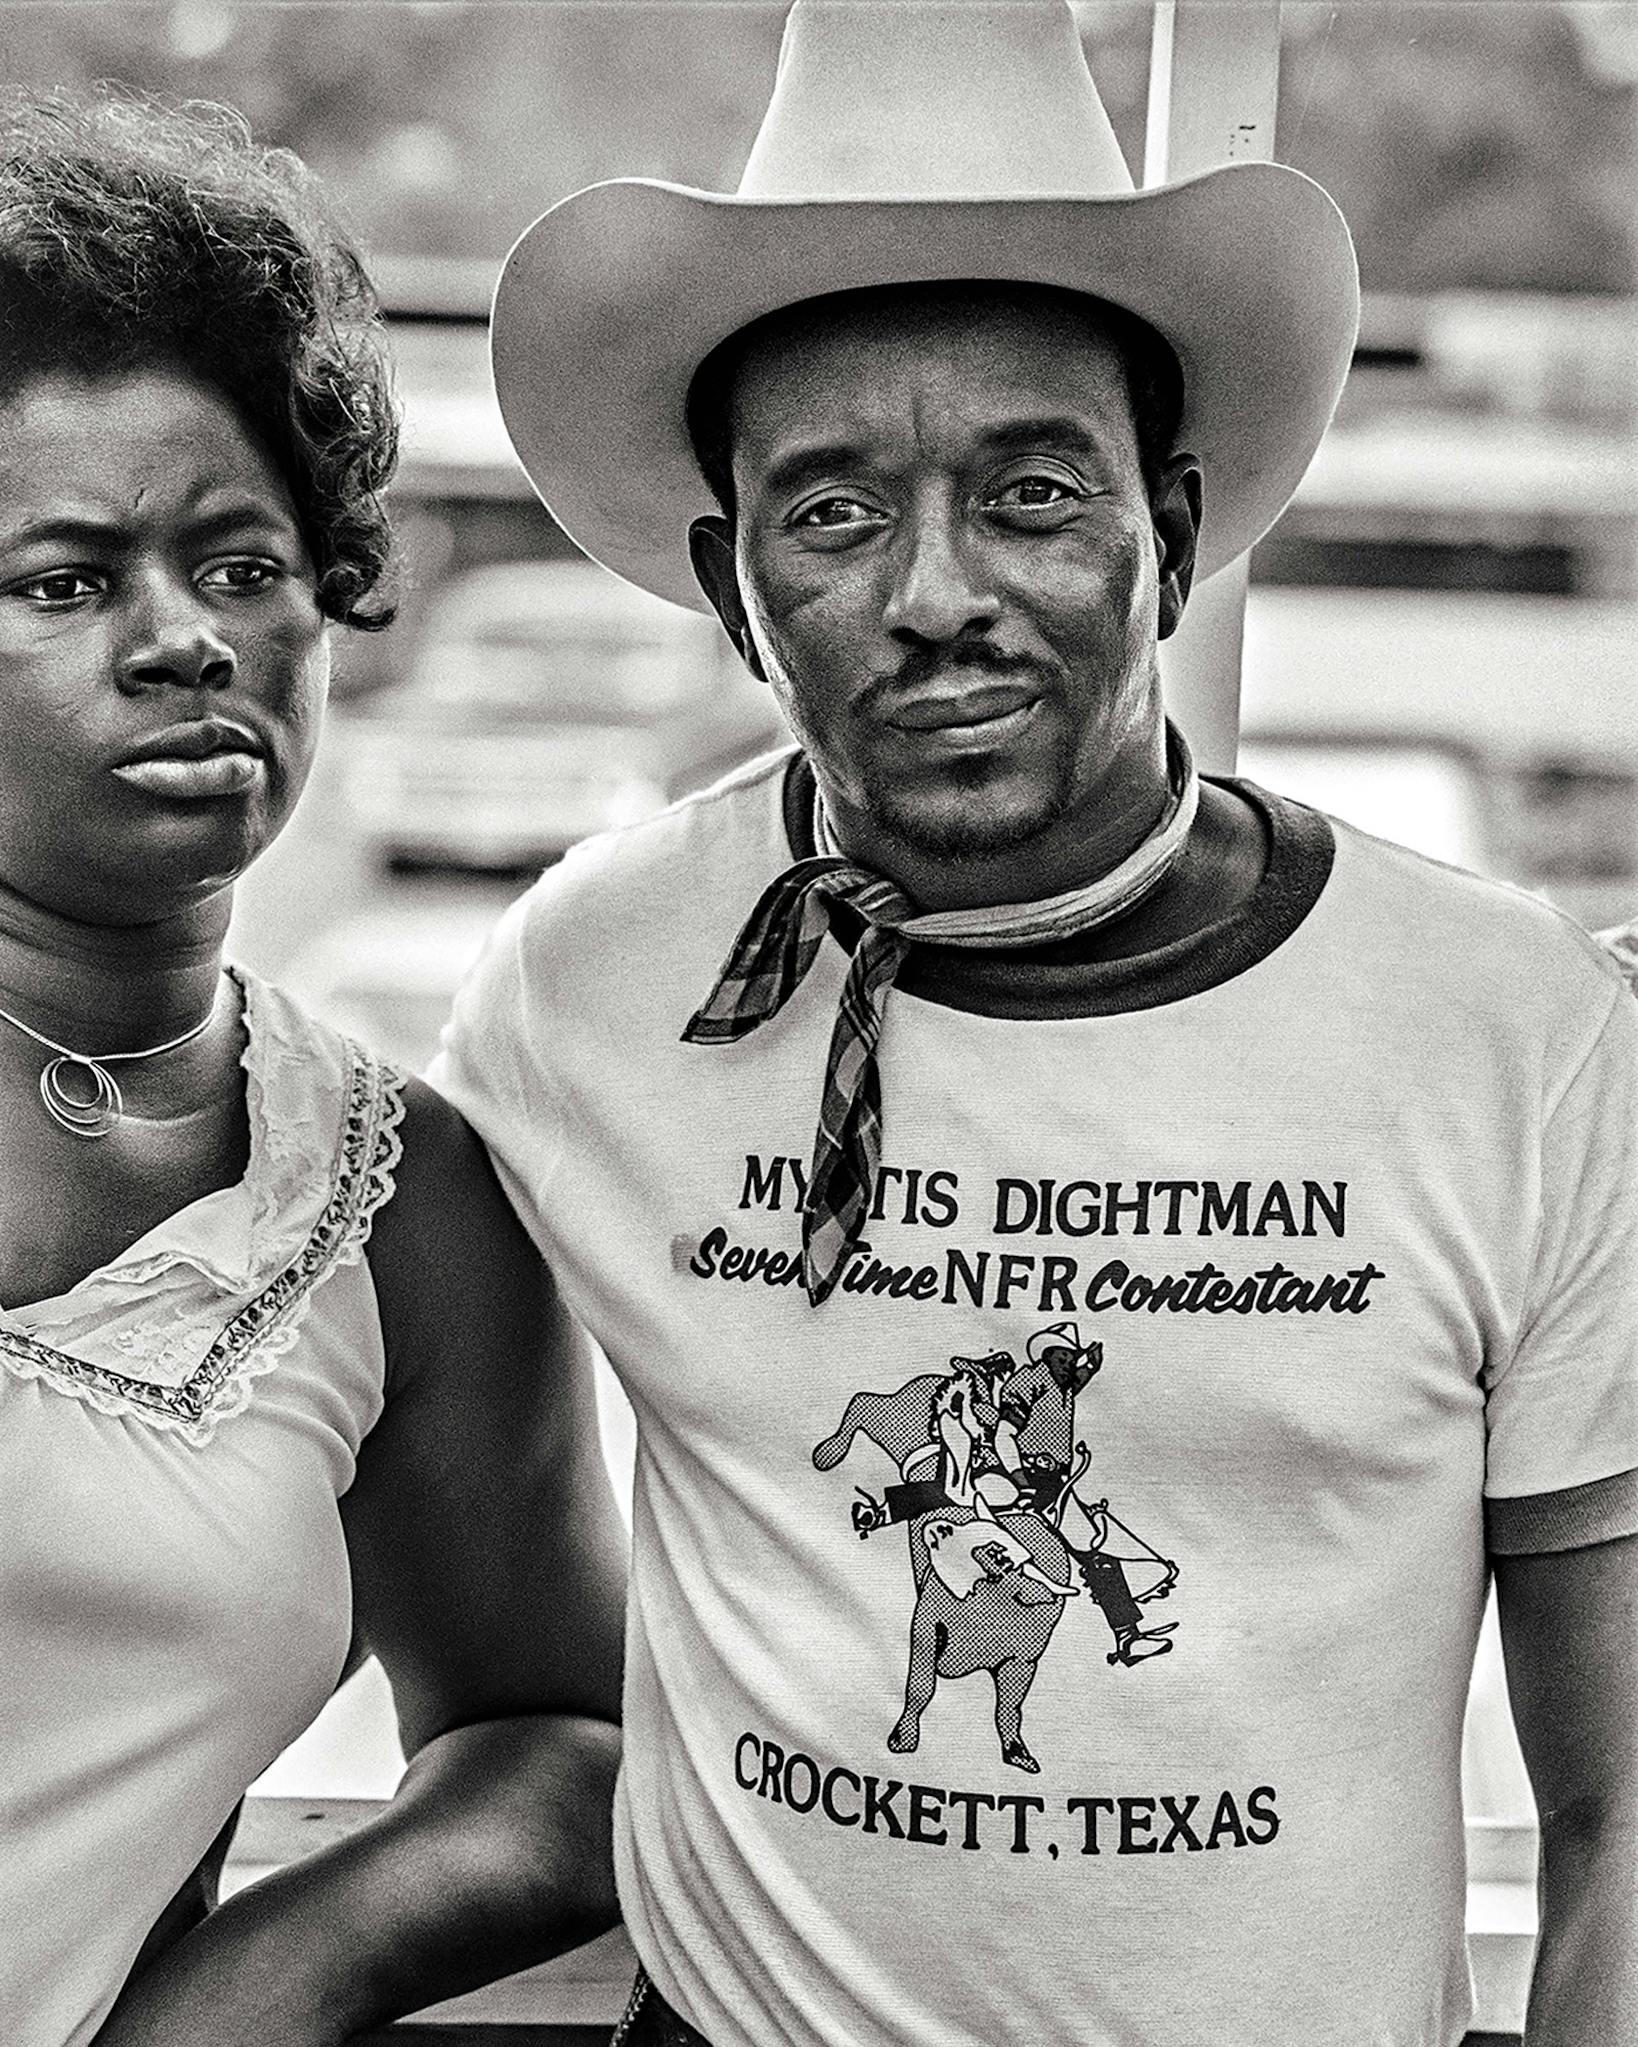 Rough-stock rider Robert Dugas, with his wife, paying T-shirt tribute to the seven-time National Finals Rodeo competitor Myrtis Dightman.